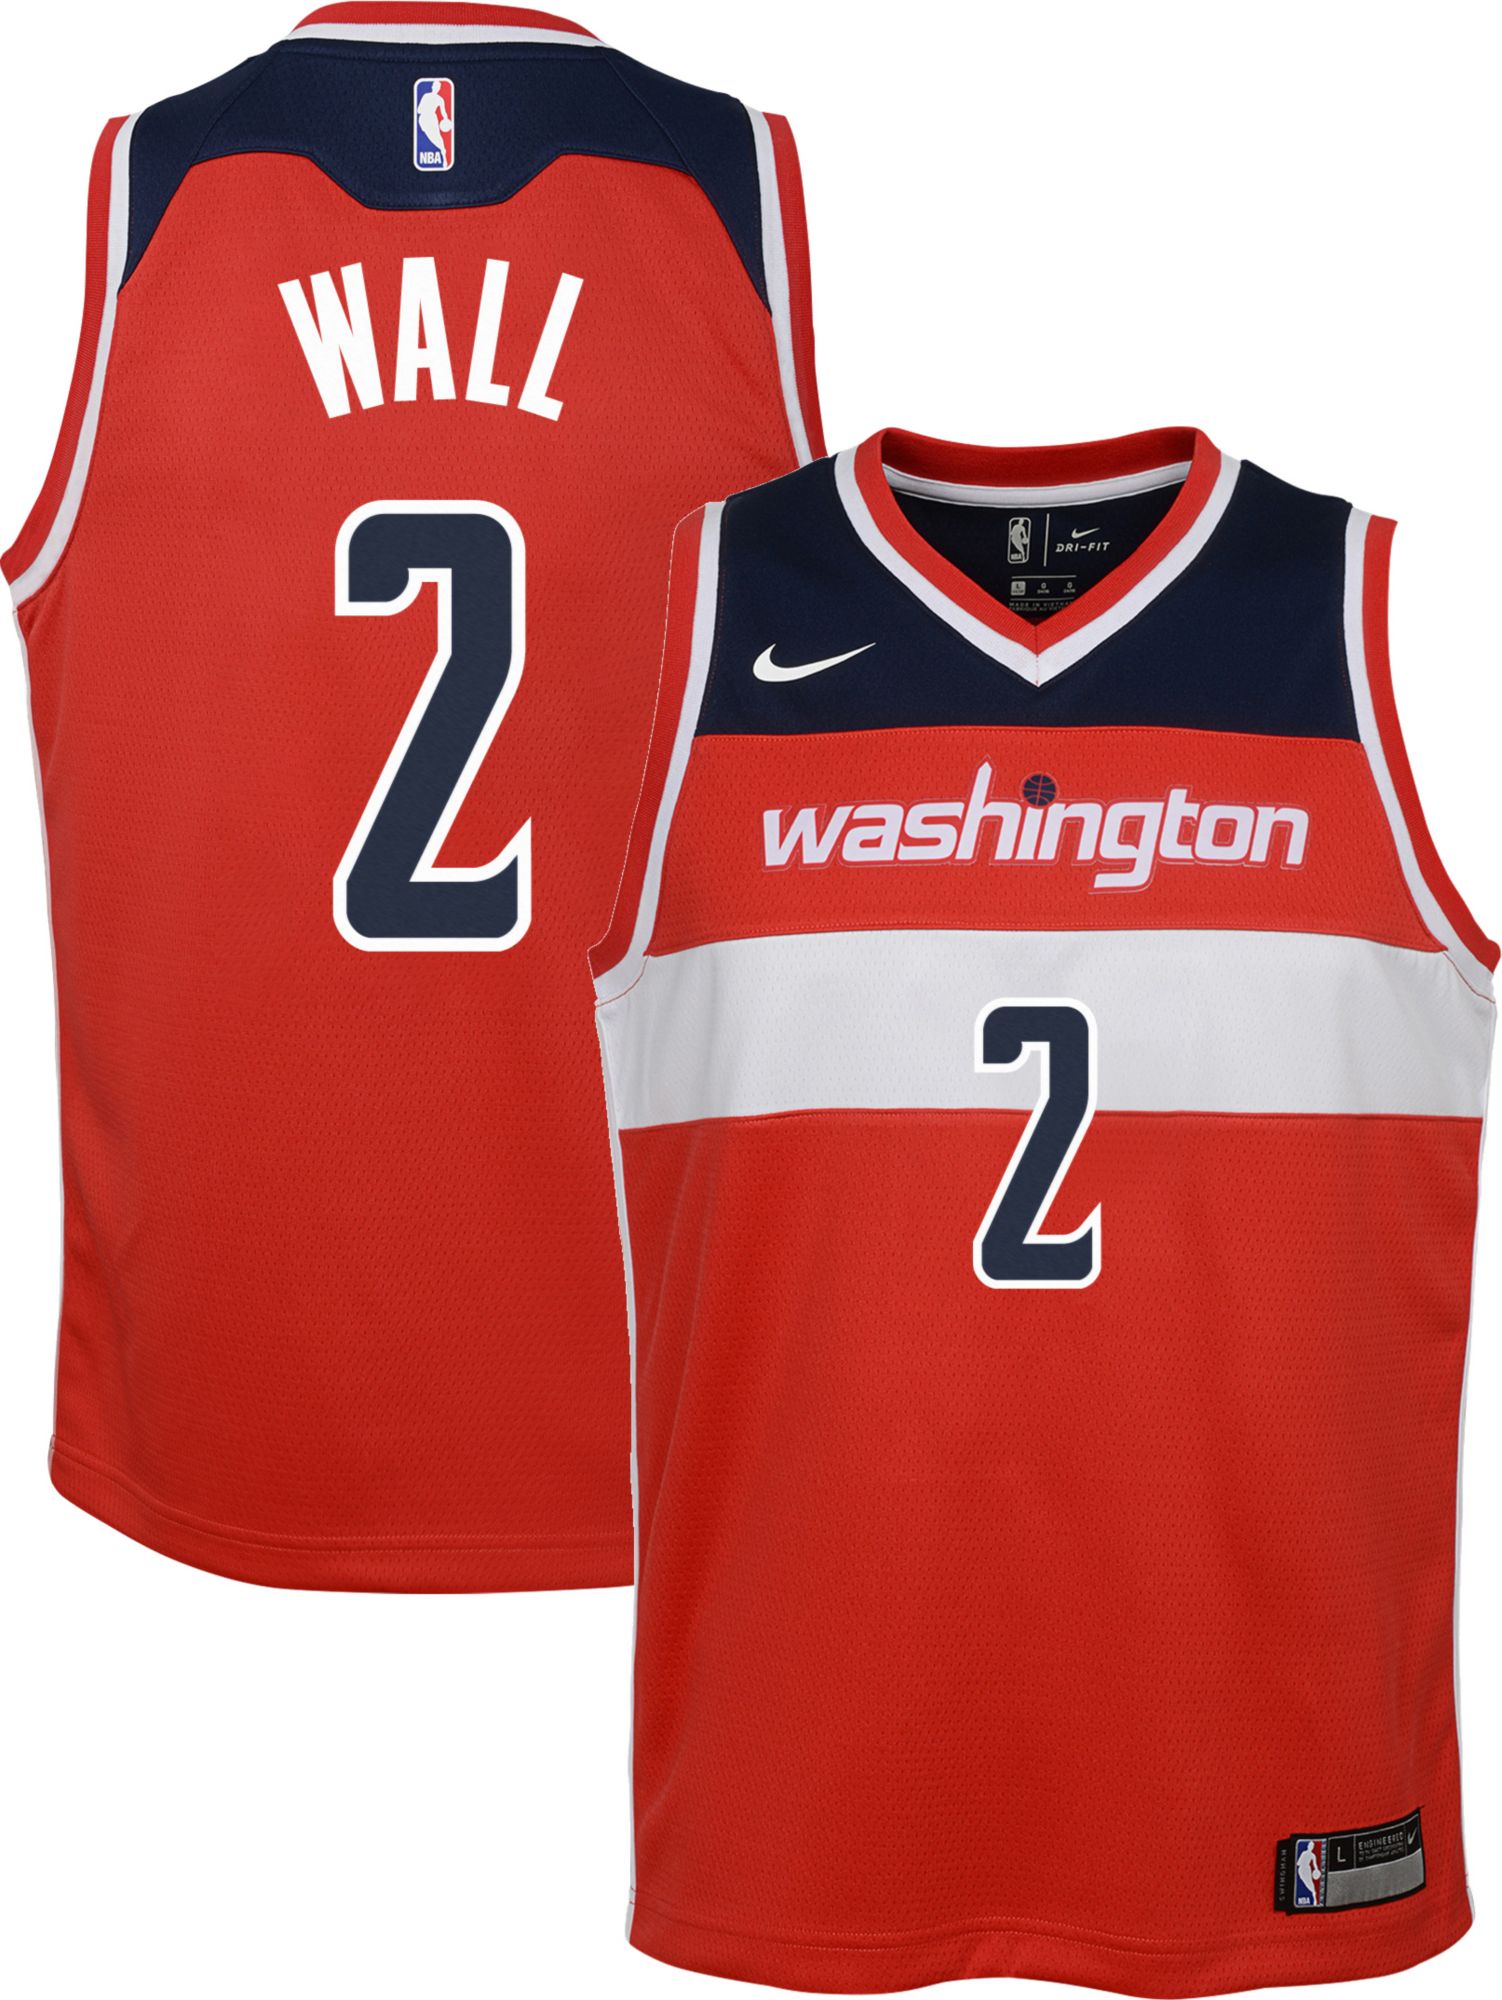 wizards red jersey